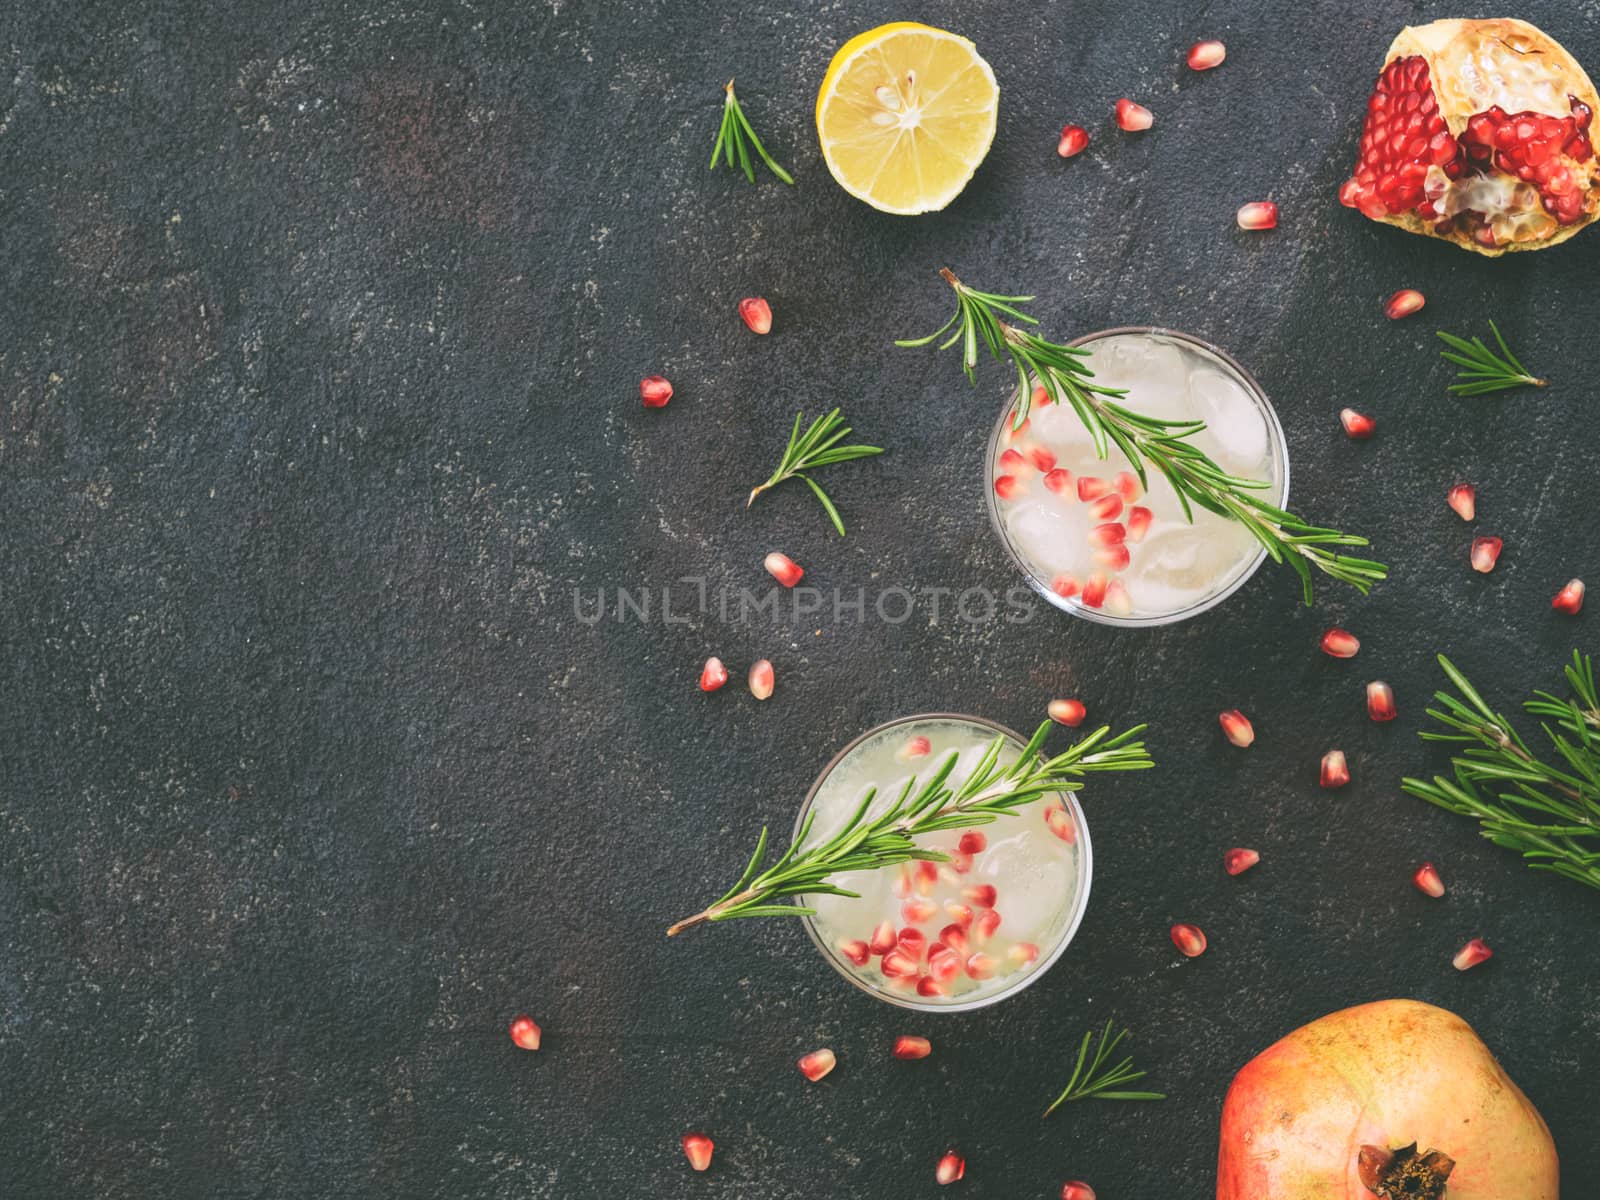 white sangria with rosemary, pomegrante and lemon juice by fascinadora